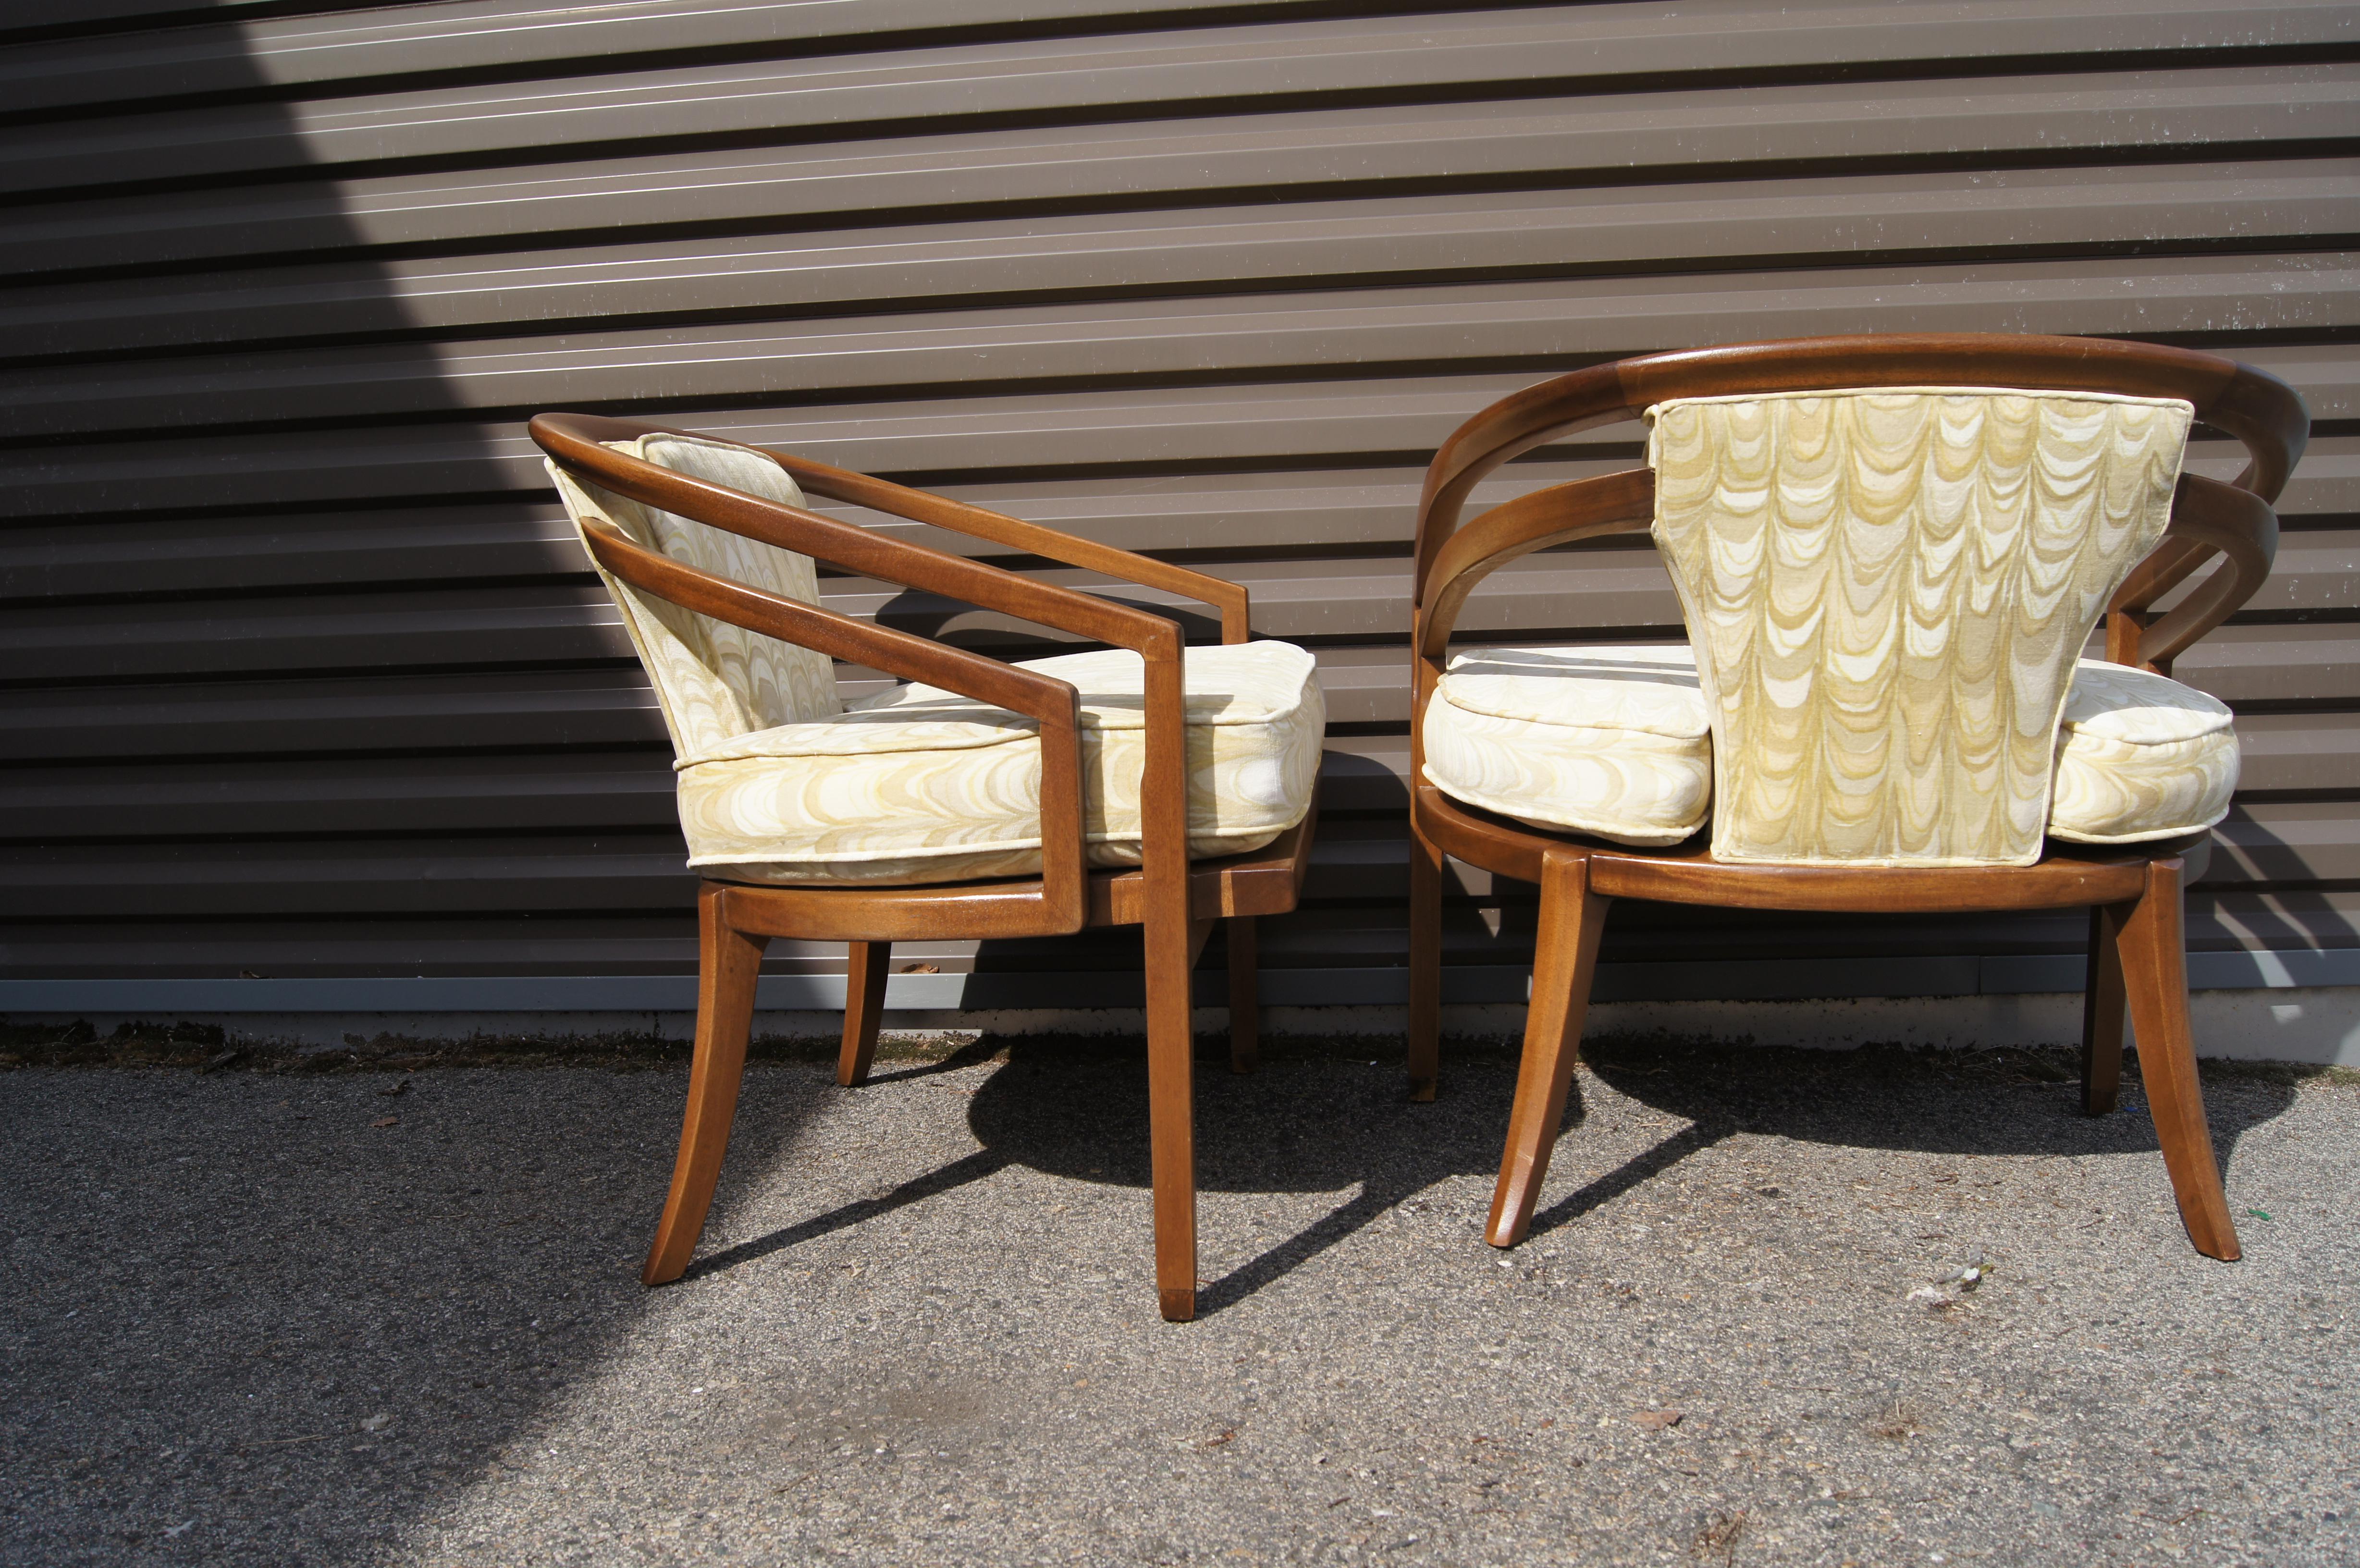 Pair of Wide Mahogany Armchairs by Baker with Jack Lenor Larsen Textile For Sale 2